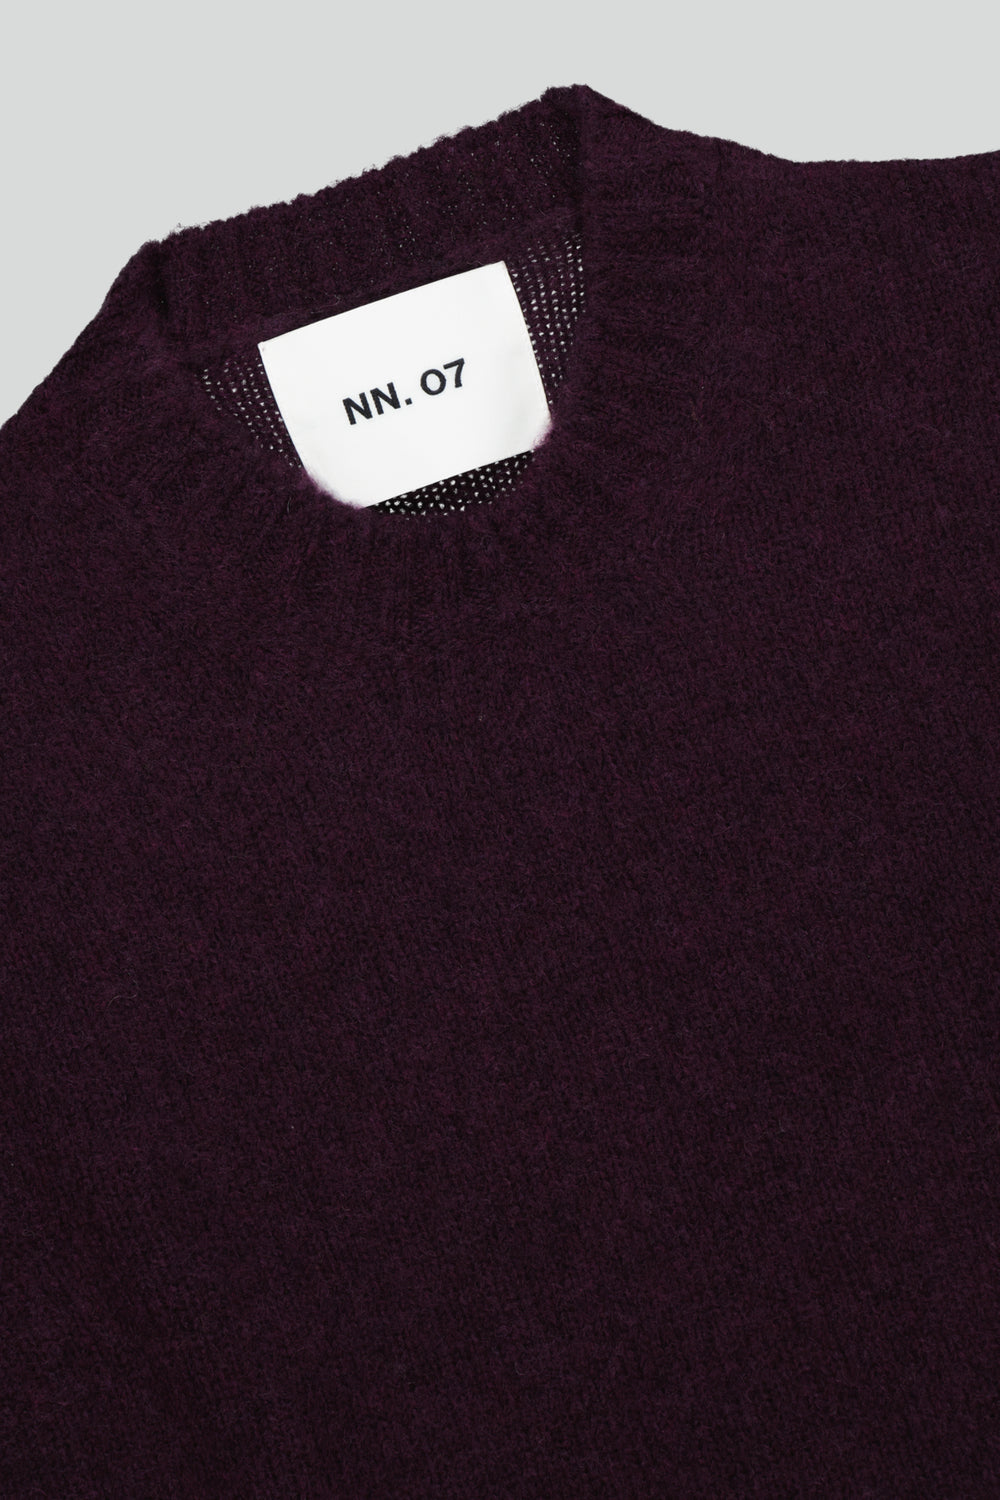 NN07 - Lee 6598 Crewneck Pullover in Plum | Buster McGee